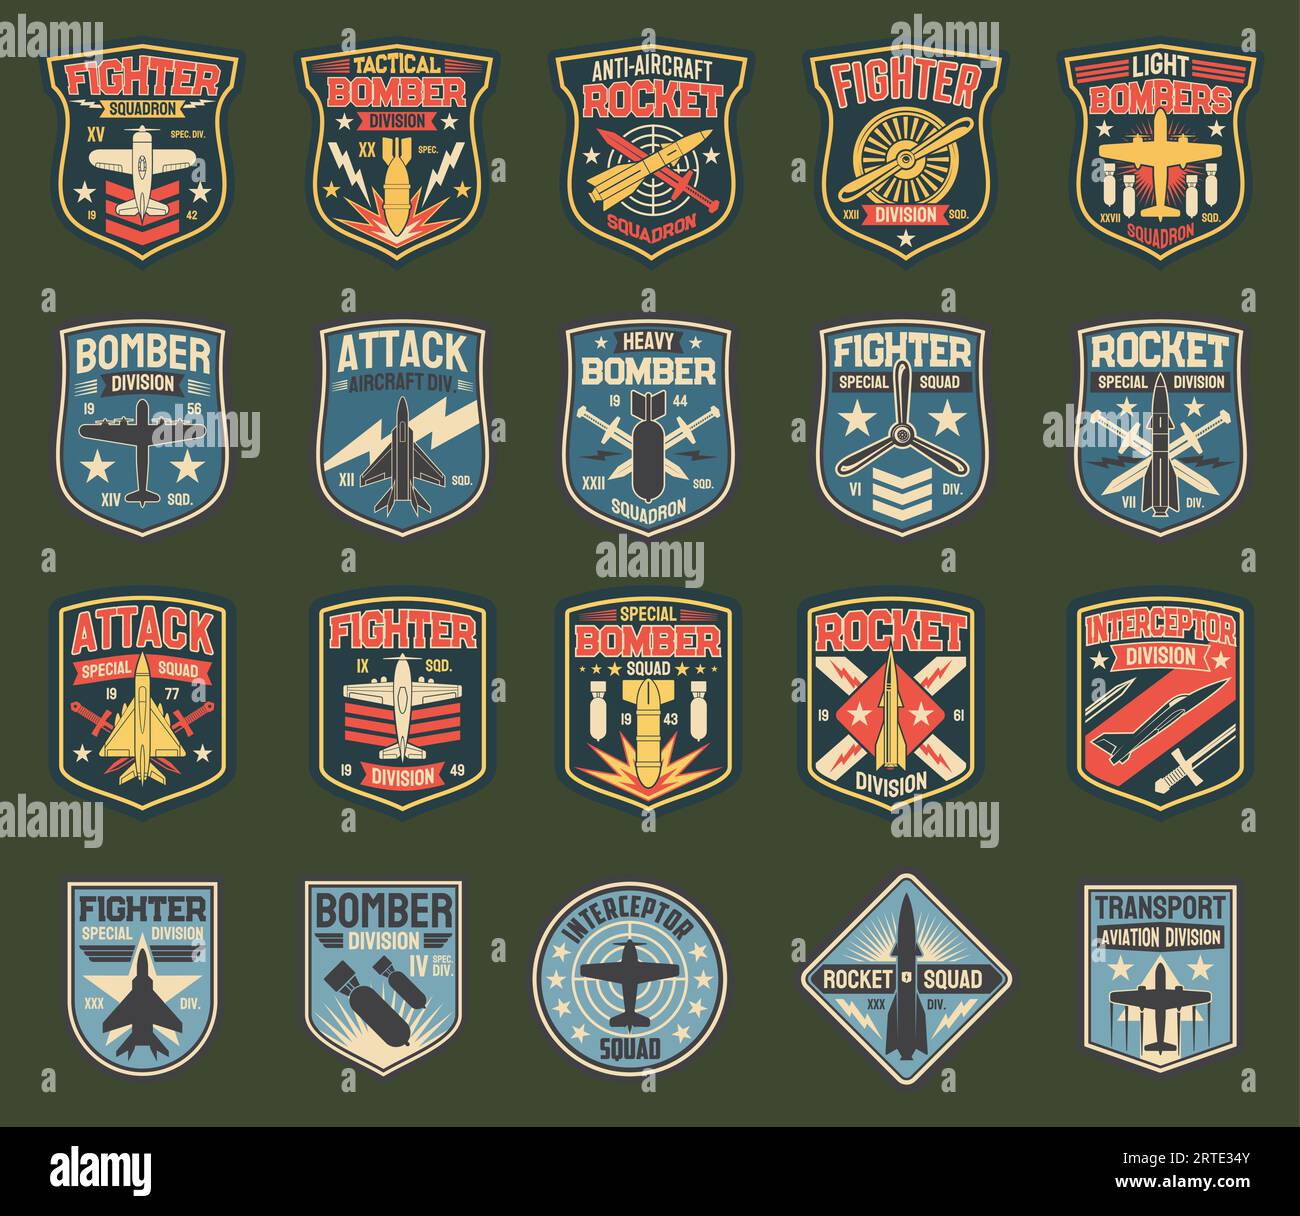 Army chevrons, vector stripes for fighter squadron, tactical, heavy and light bomber division, anti-aircraft rocket. Attack aircraft, special squad, interceptor, aviation transport army insignia icons Stock Vector